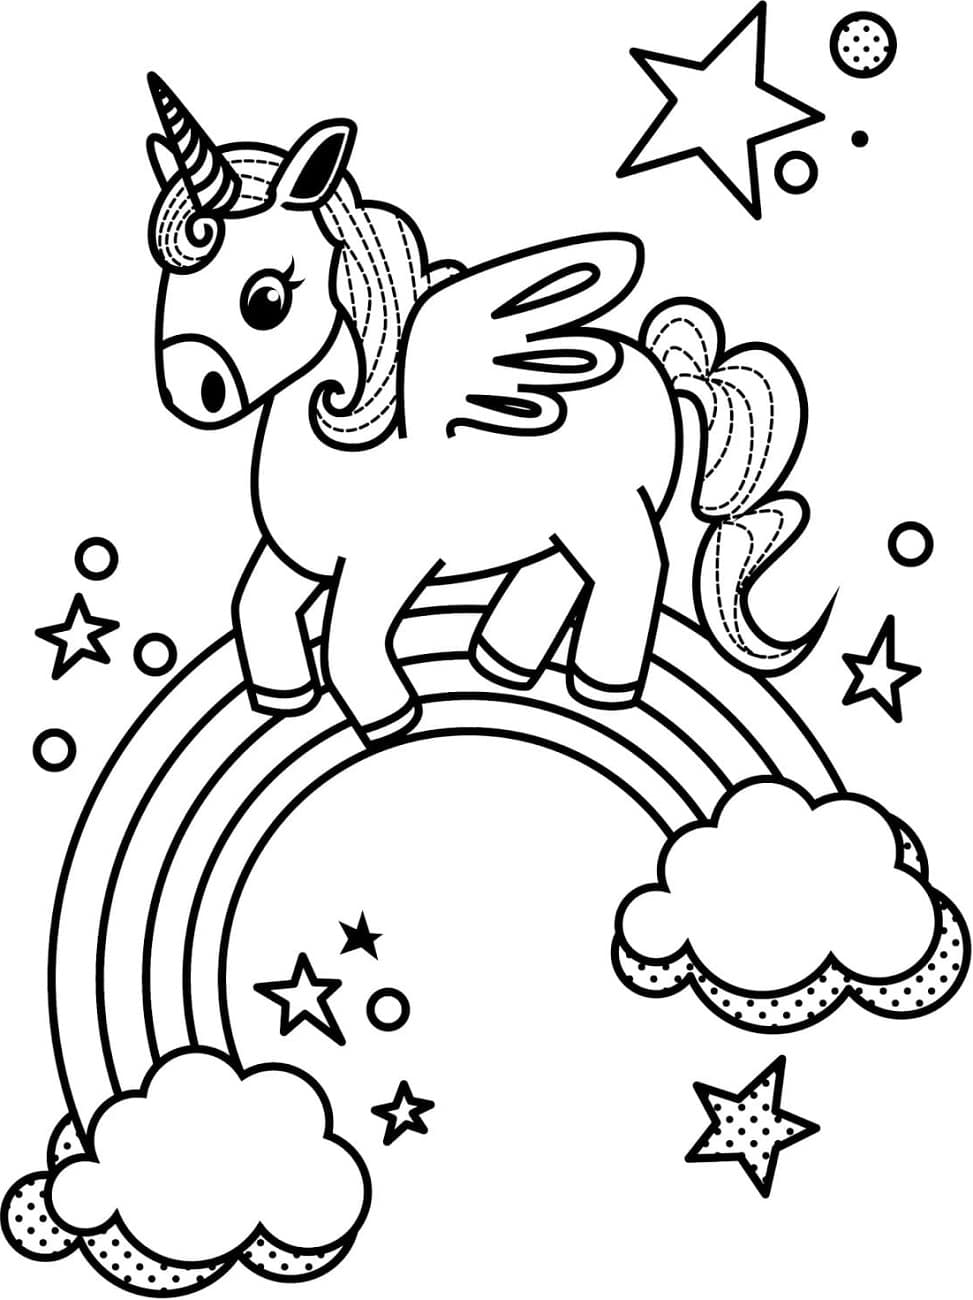 Little Unicorn And Rainbow Coloring Page   Free Printable Coloring ...